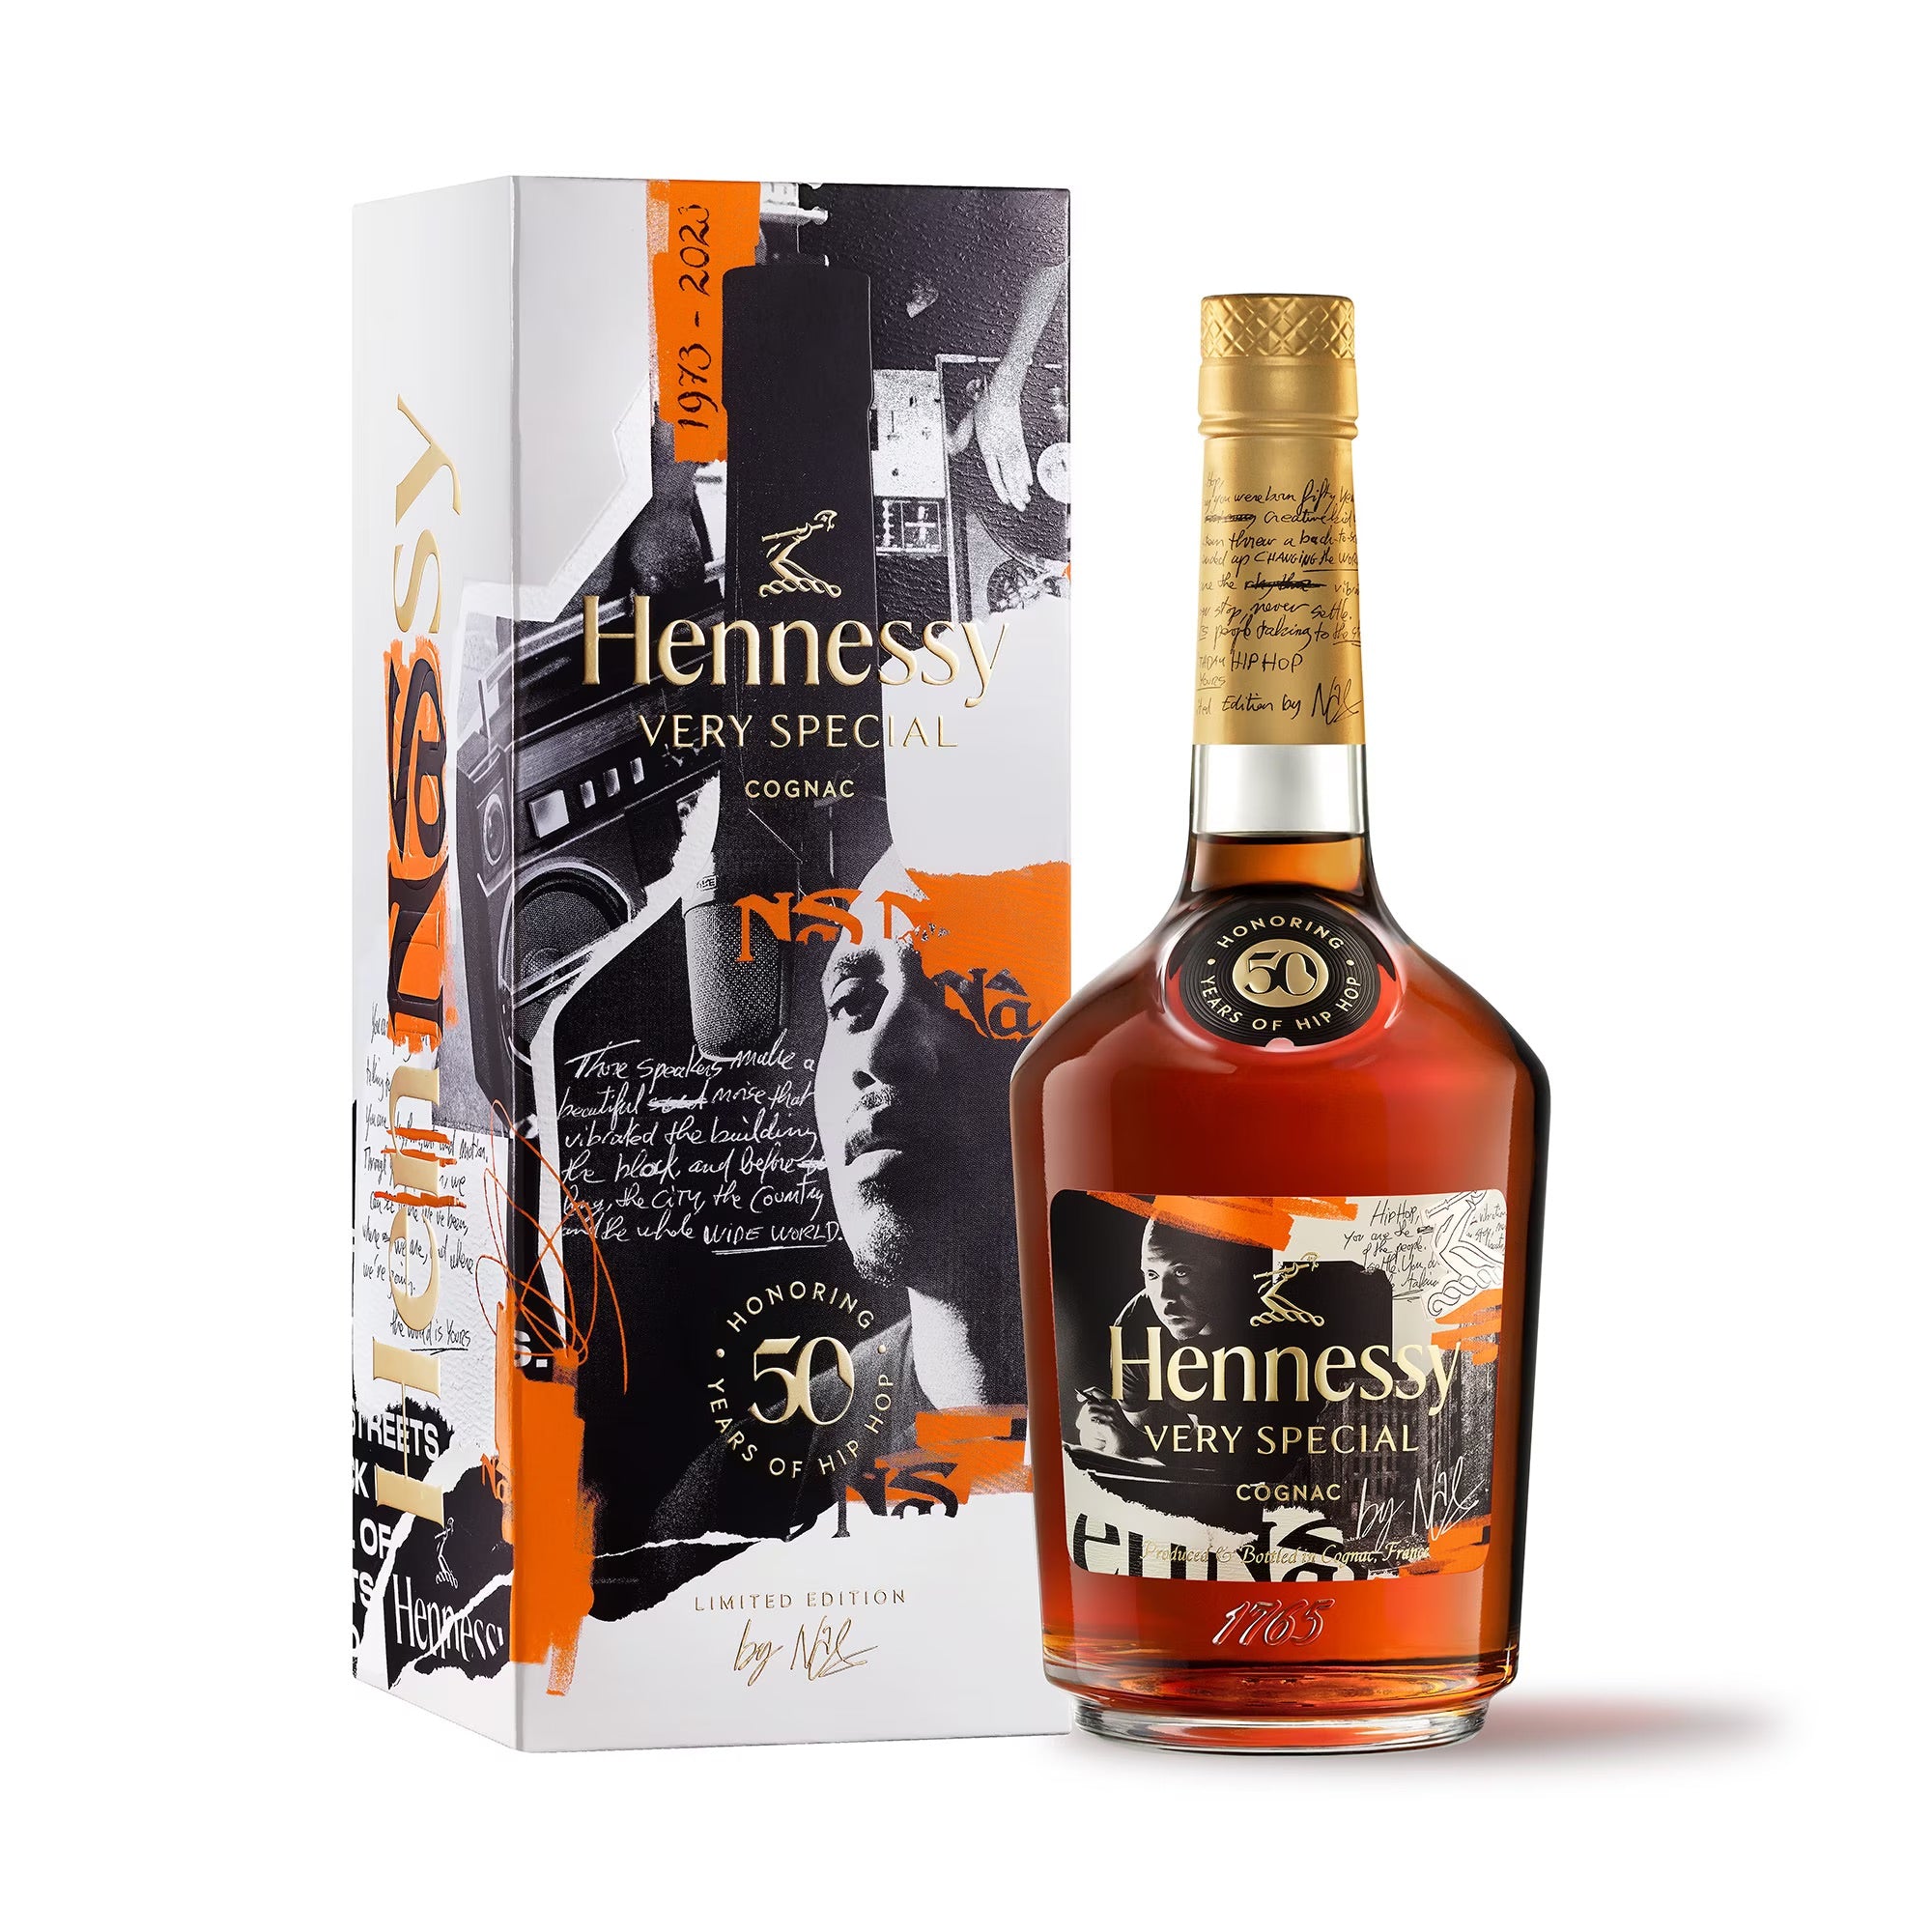 Hennessy - Cognac - Hennessy Very Special (V.S.) - Exclusive